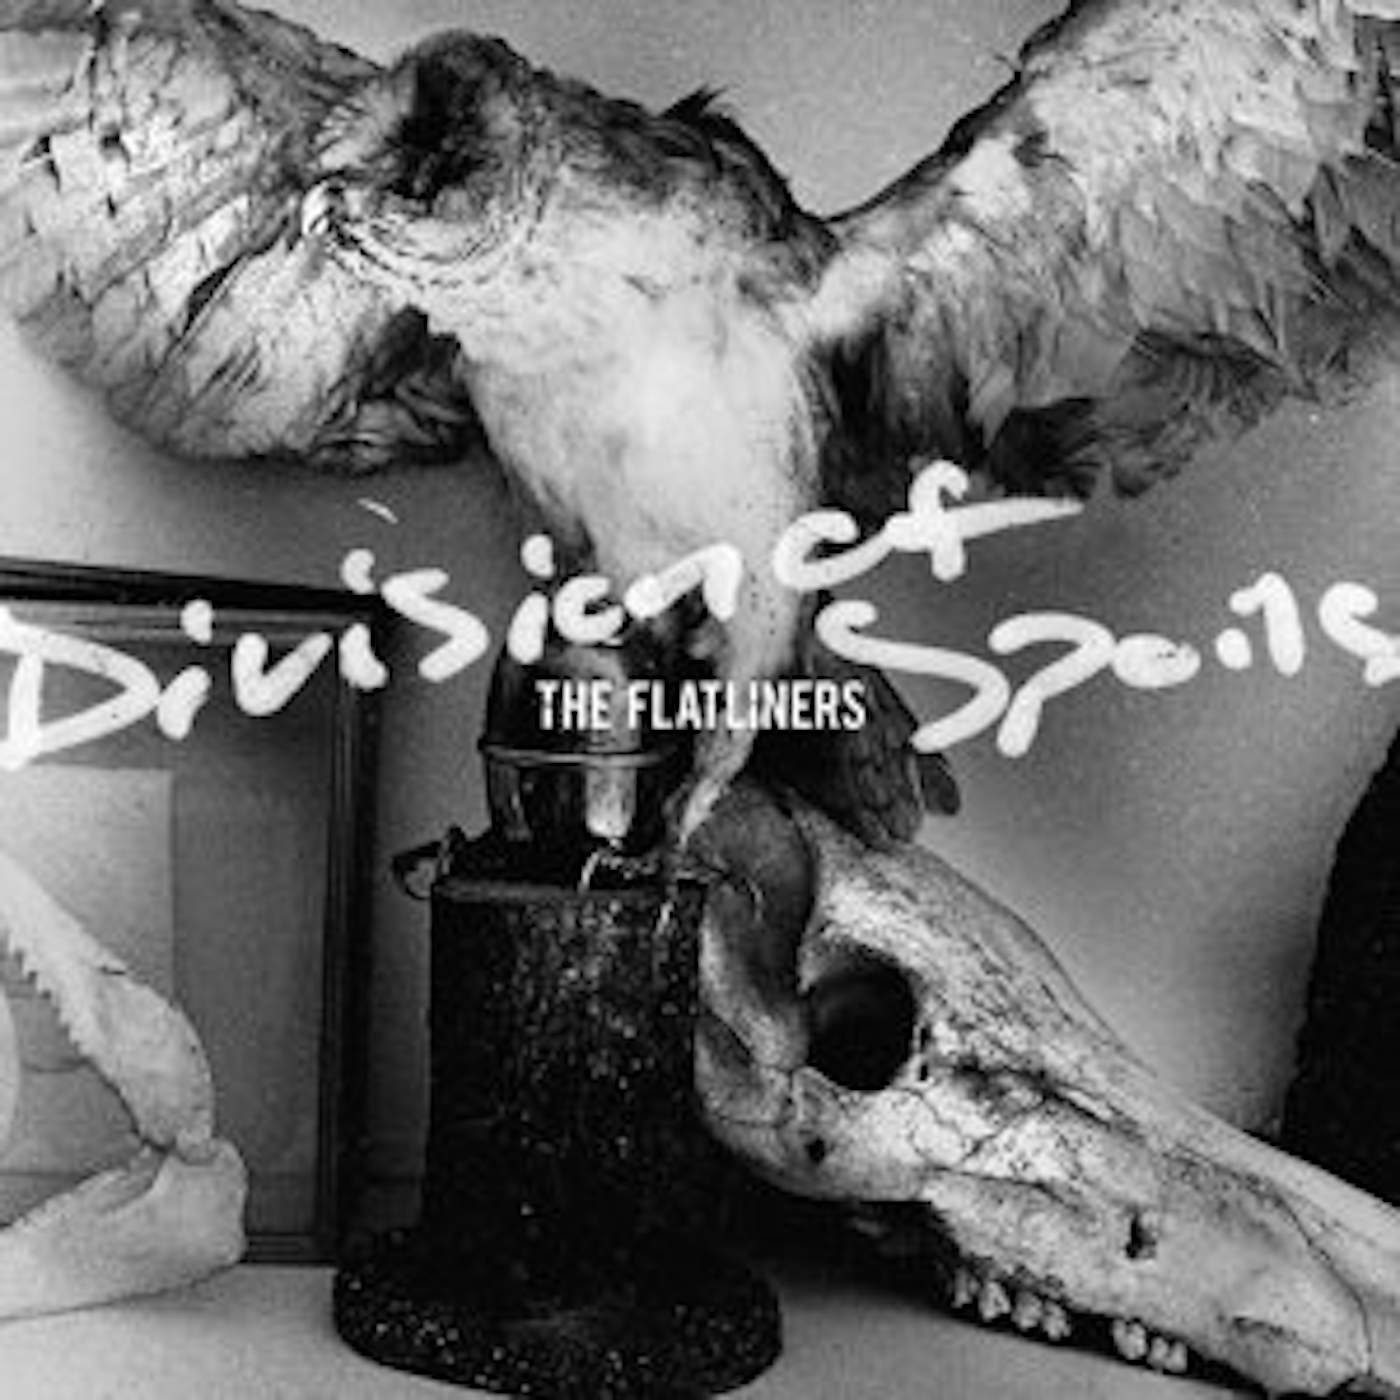 The Flatliners Division of Spoils Vinyl Record